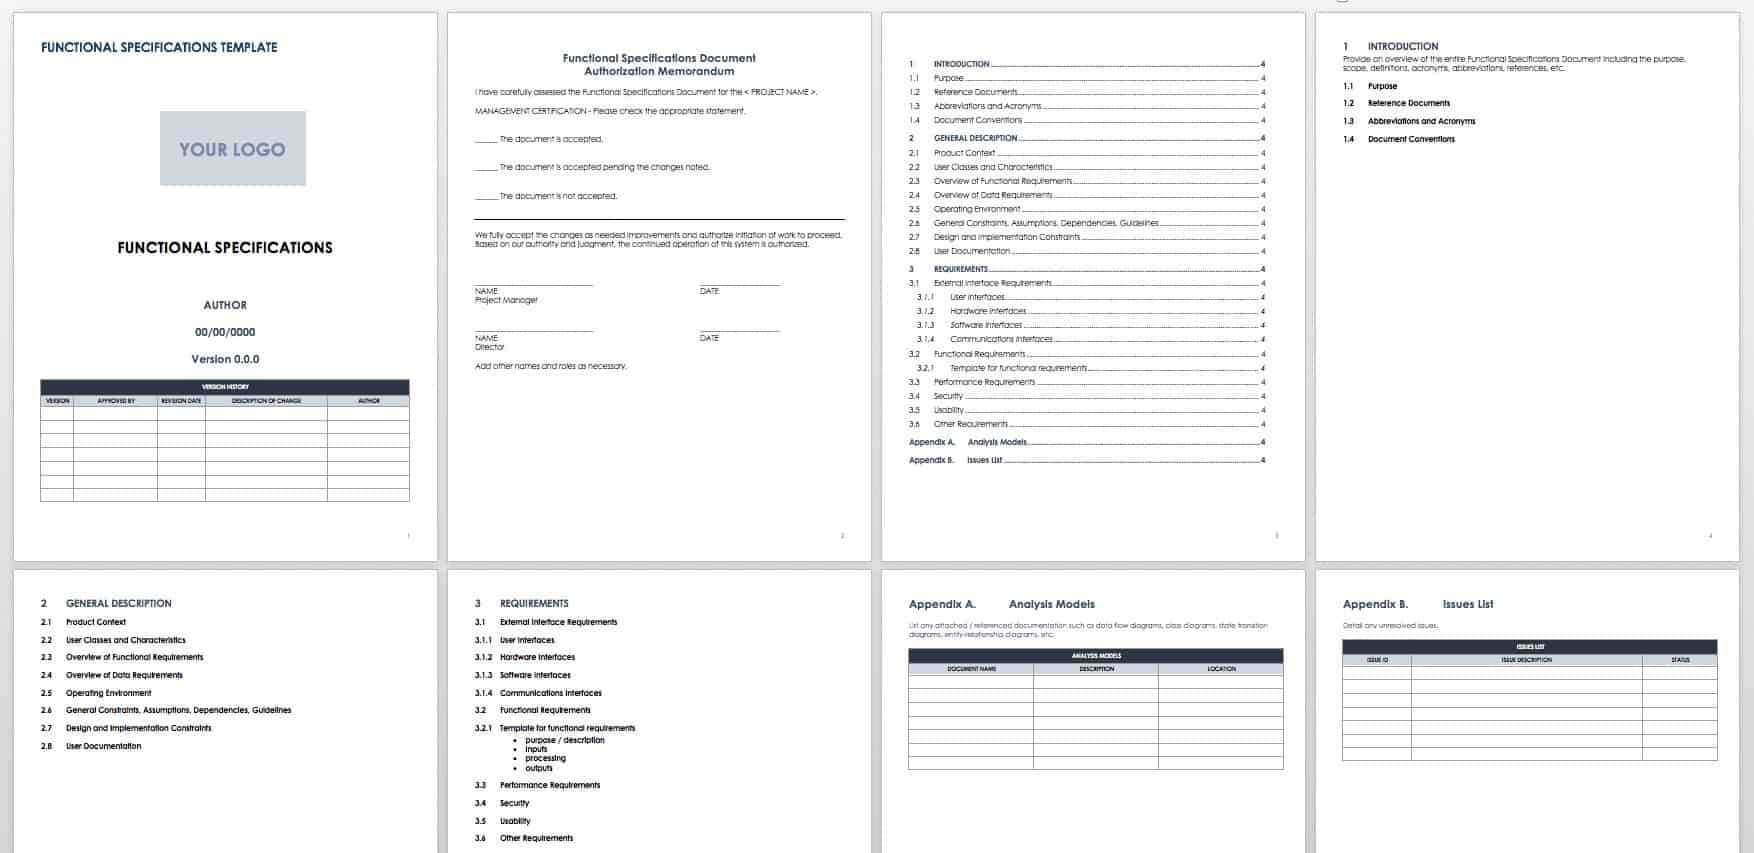 Free Functional Specification Templates | Smartsheet Within Report Requirements Document Template